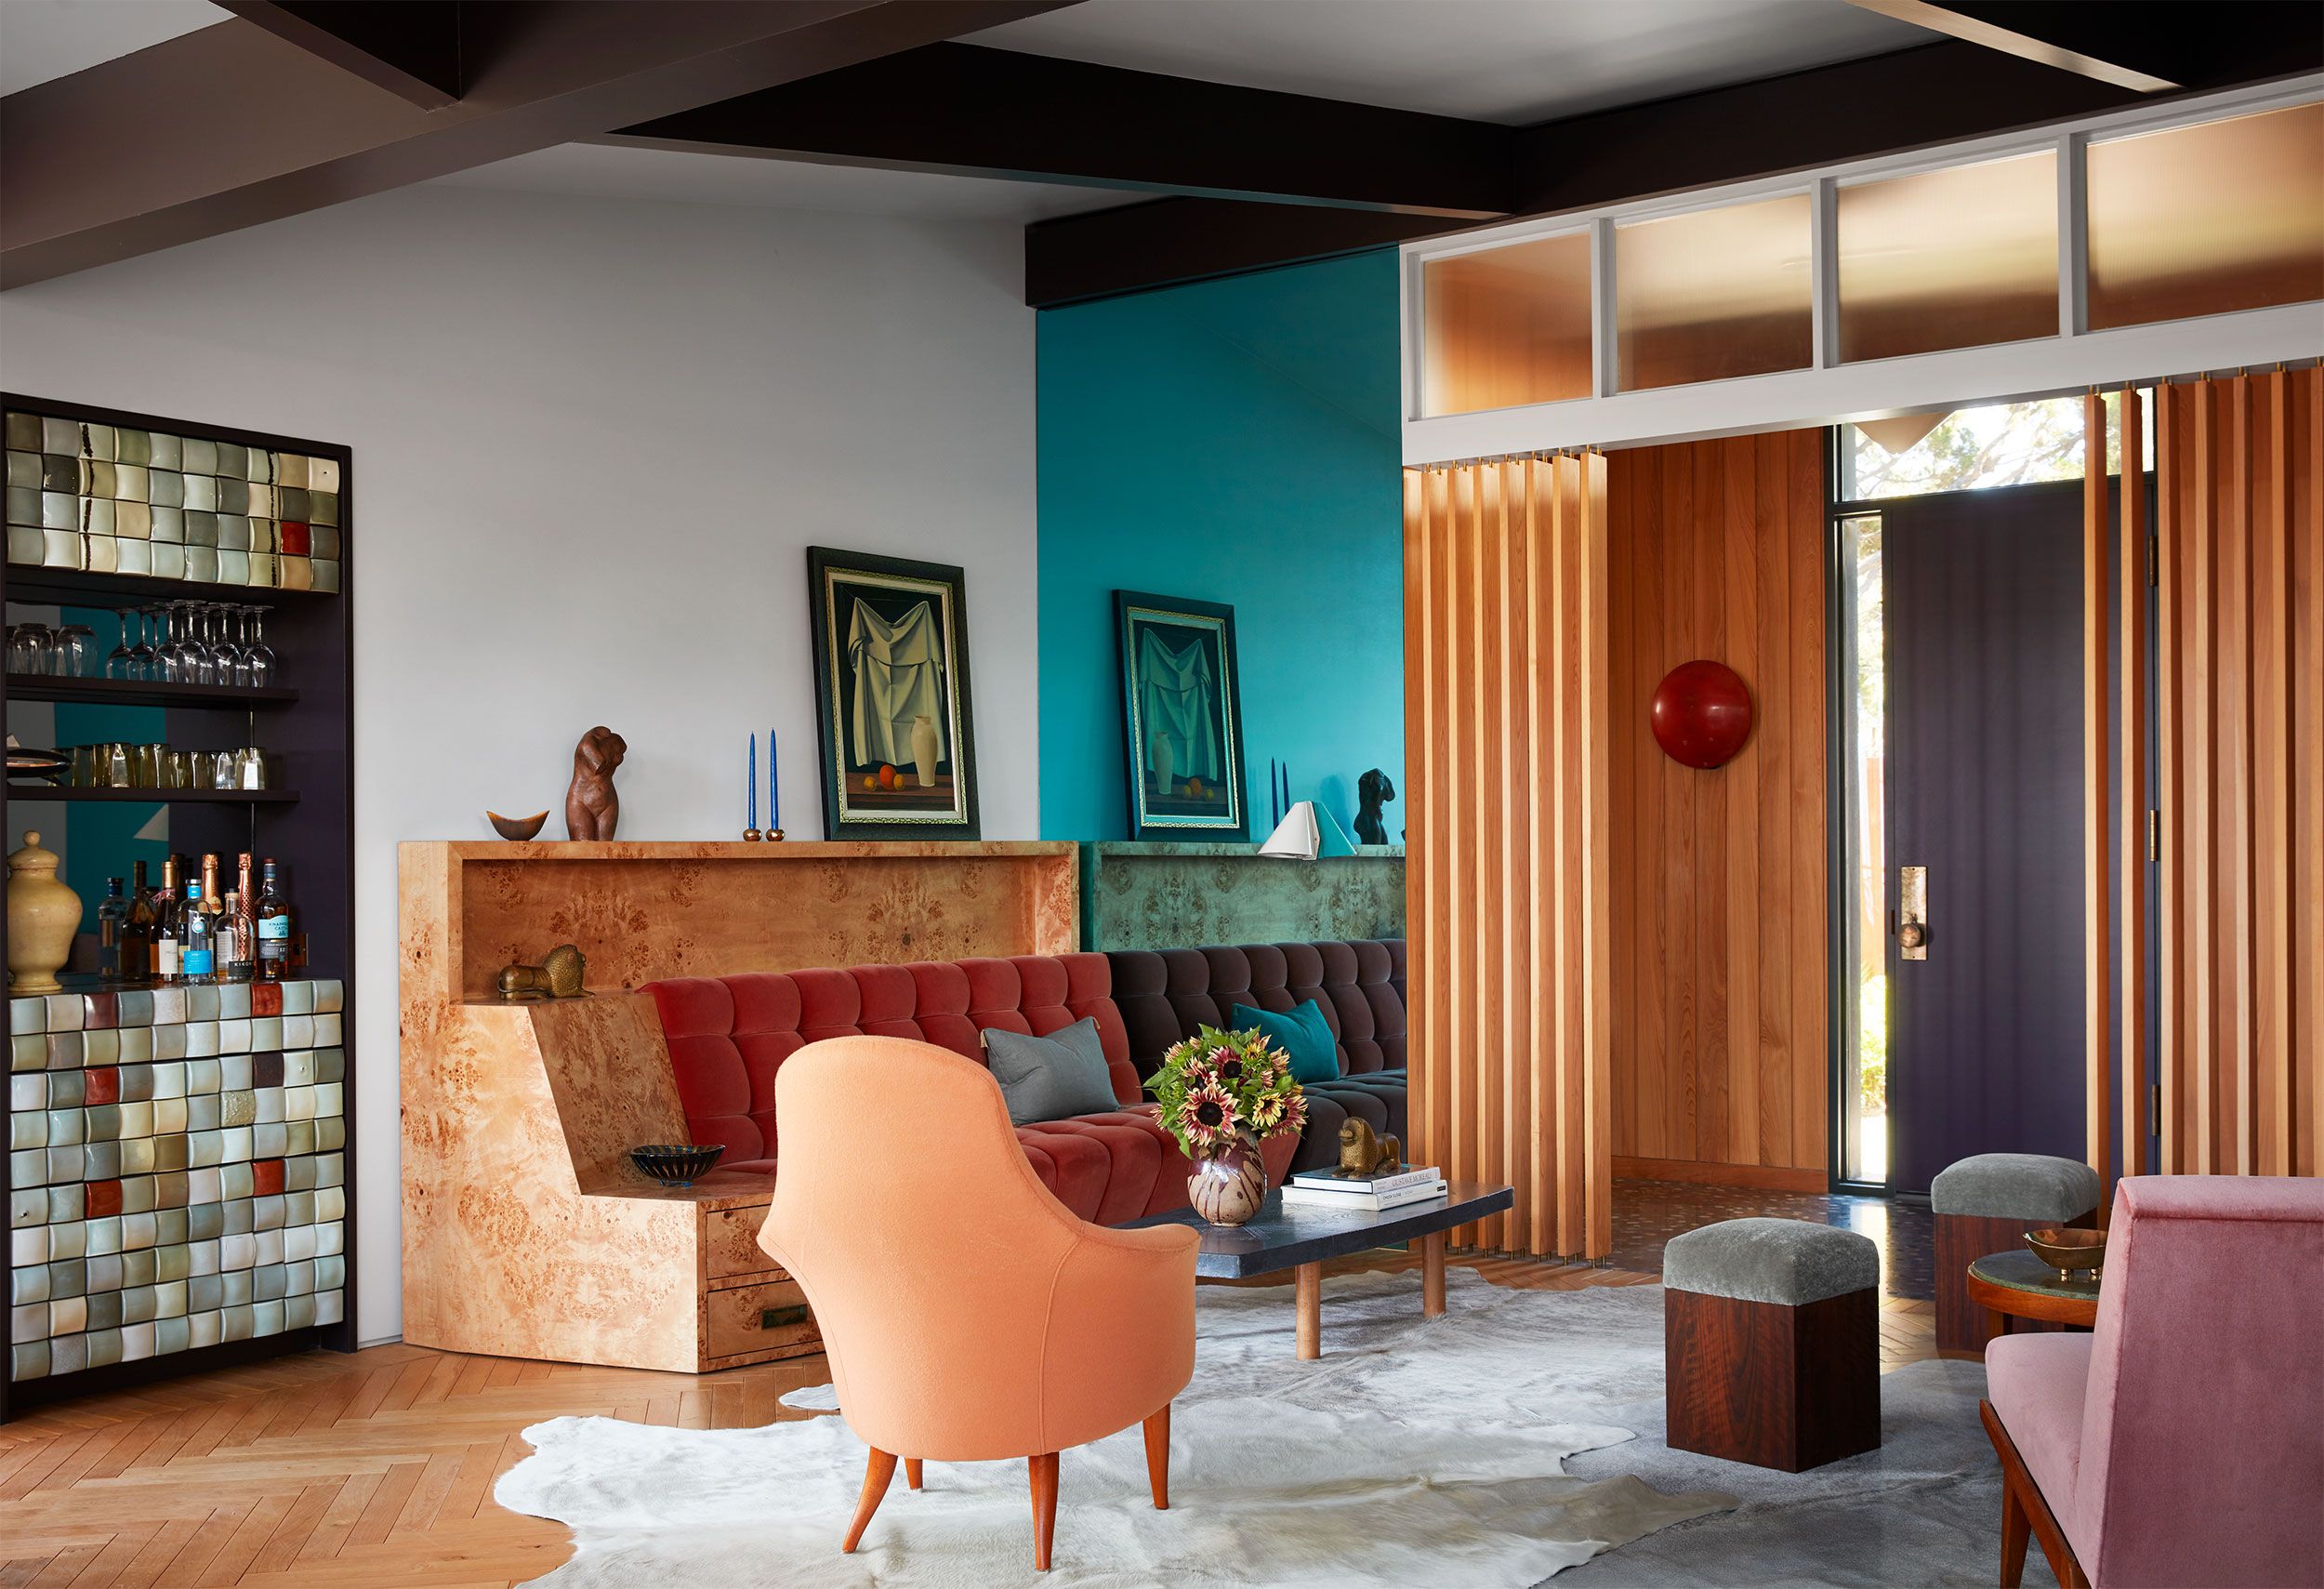 Texas Designer Stands Out With MidCentury Modern Style